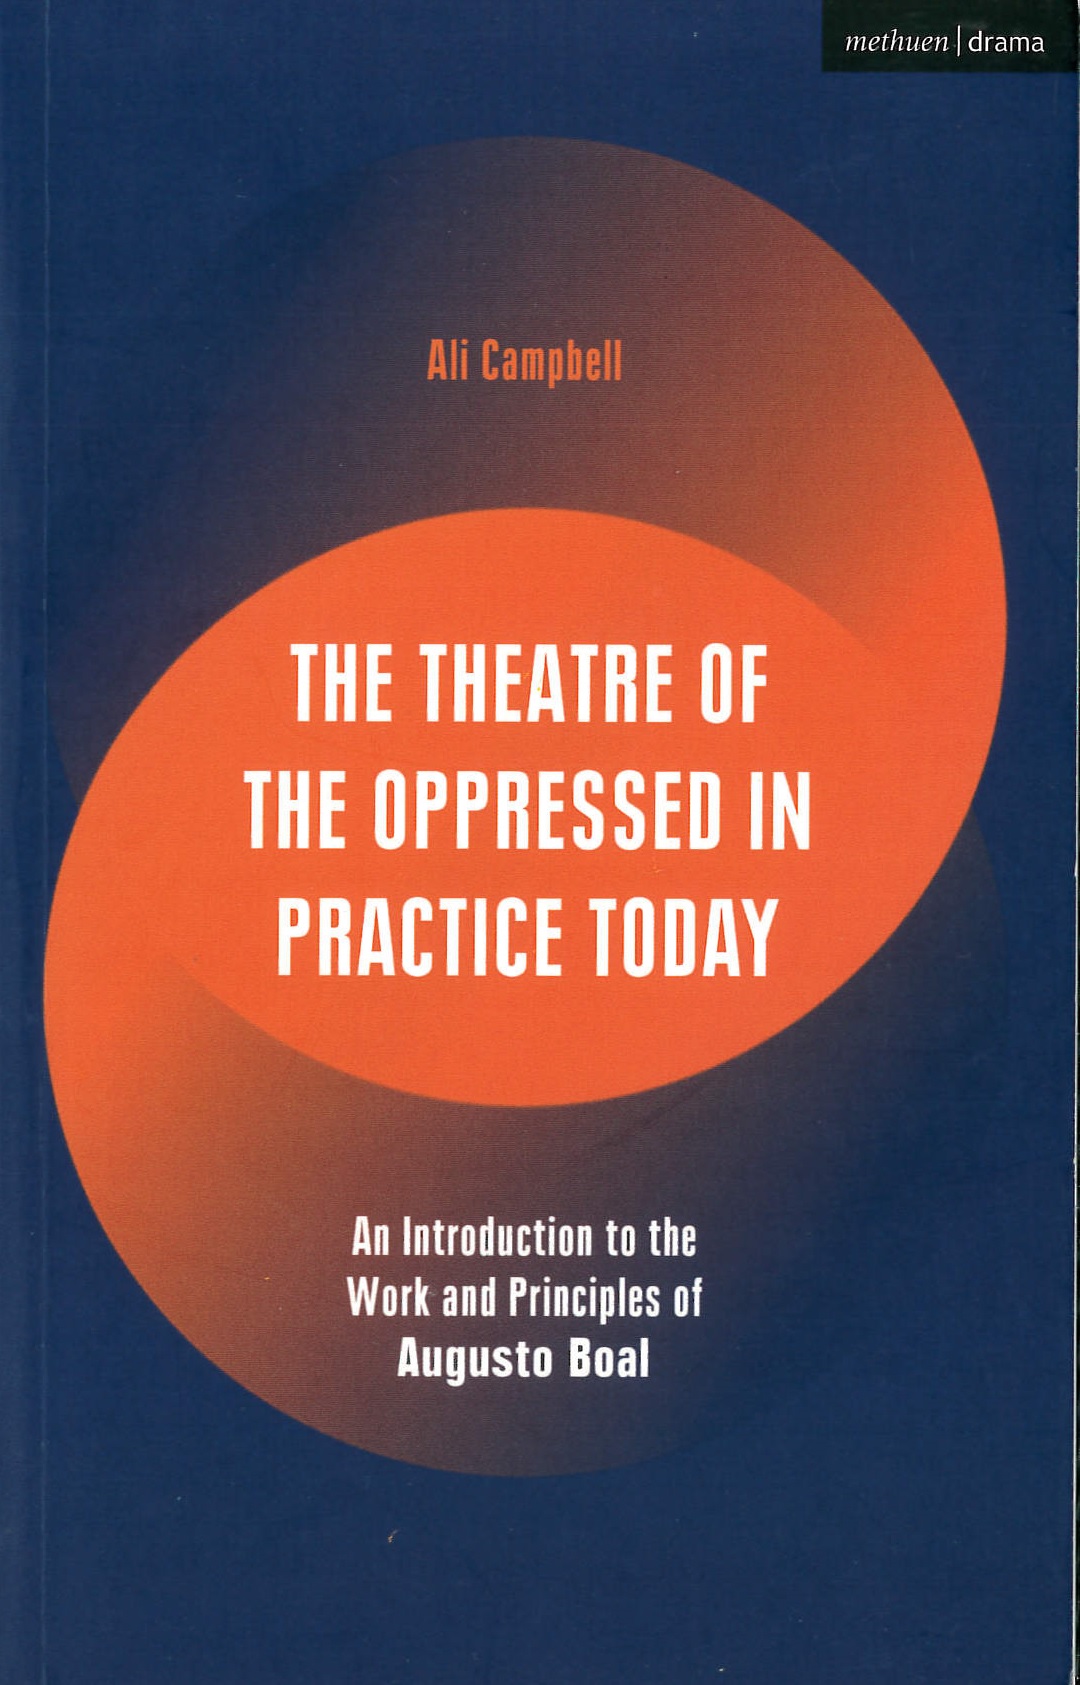 The Theatre of the Oppressed in practice today : an introduction to the work and principles of Augusto Boal